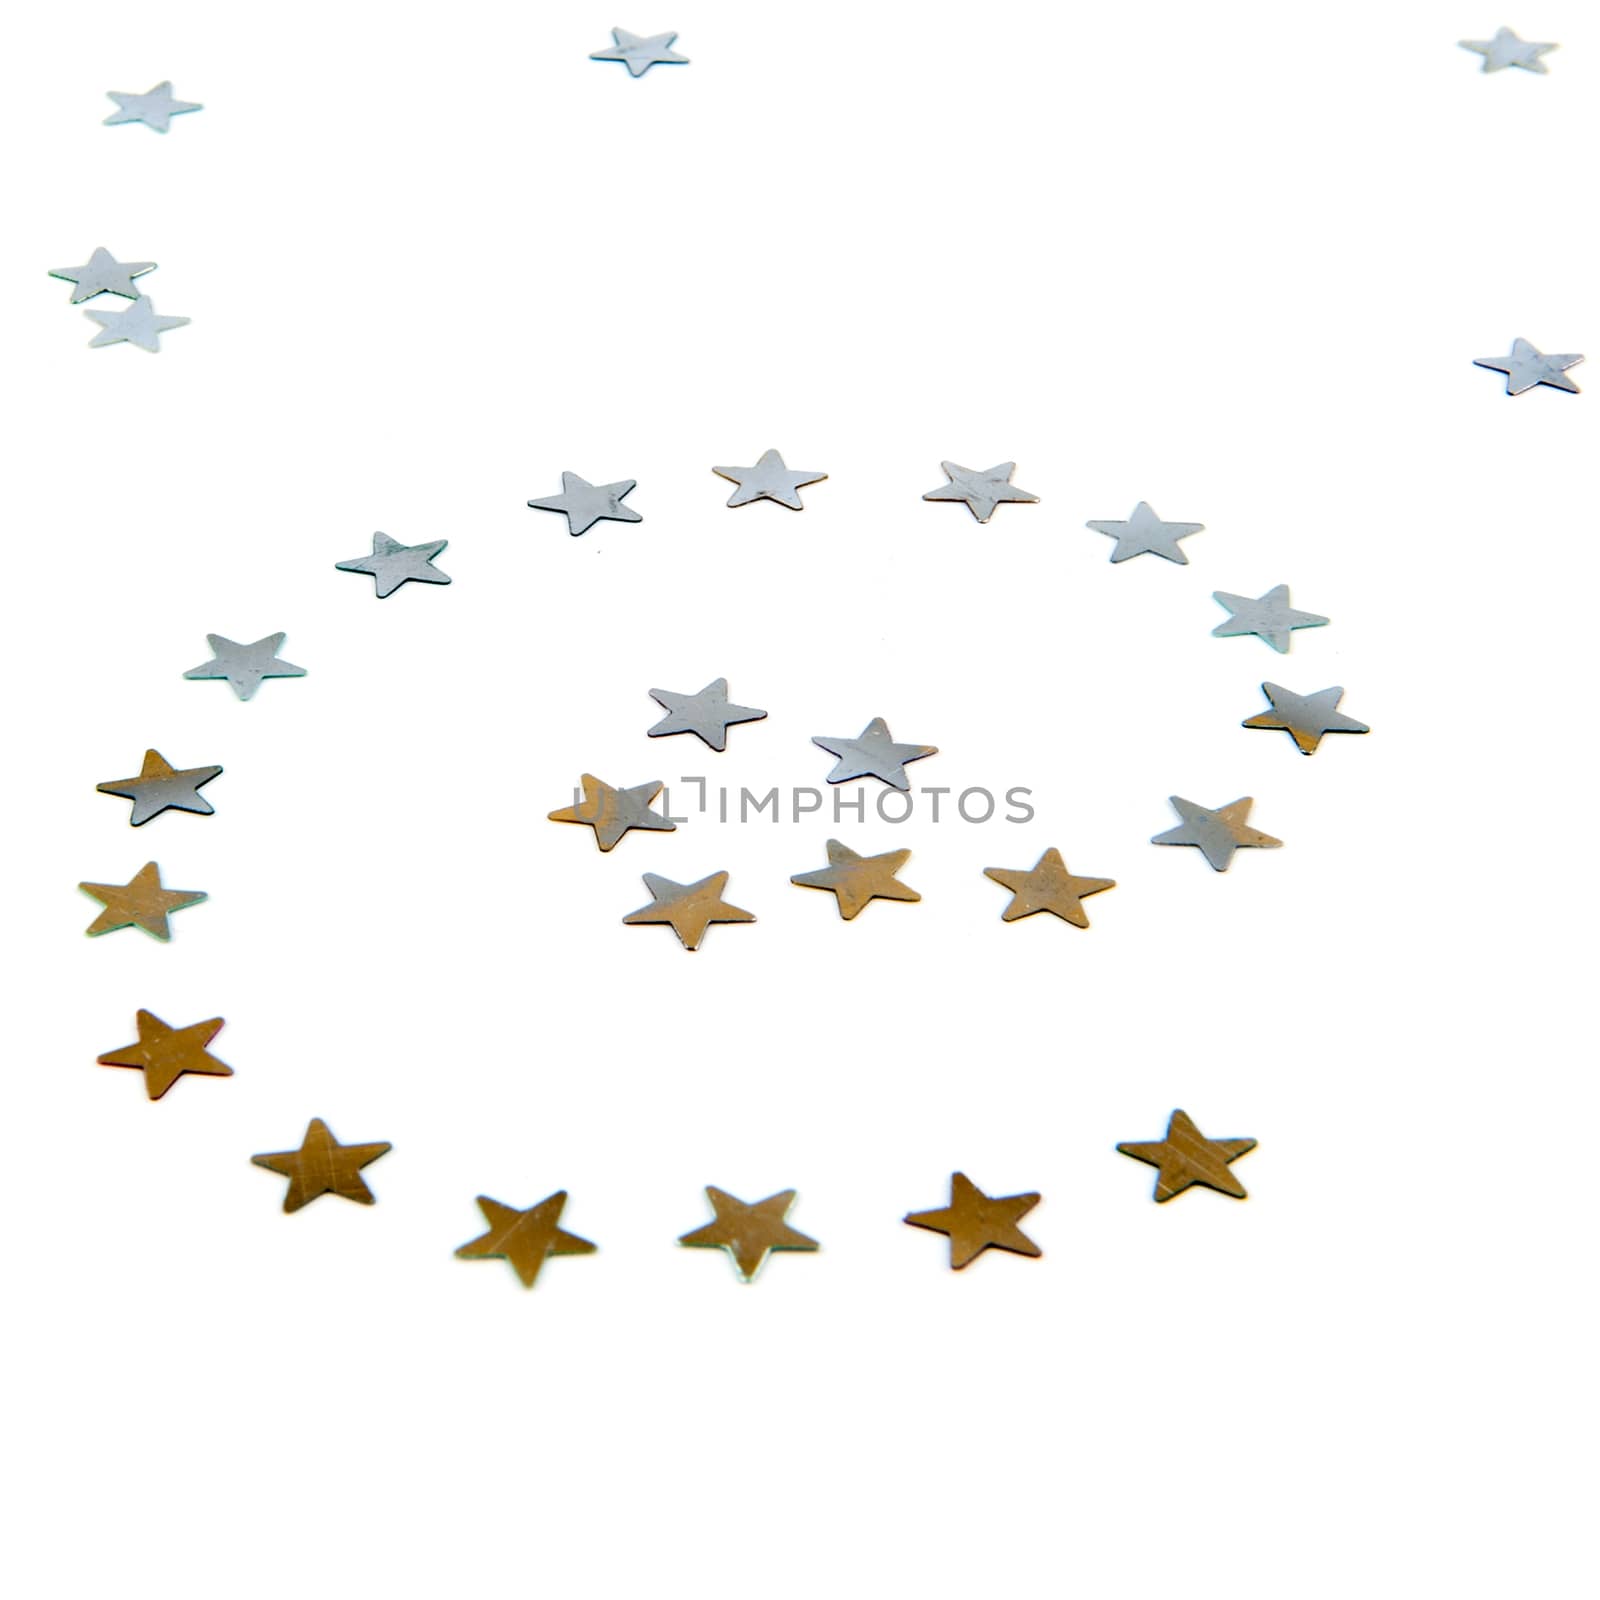 a gold and silver atpersand made of stars on a white background